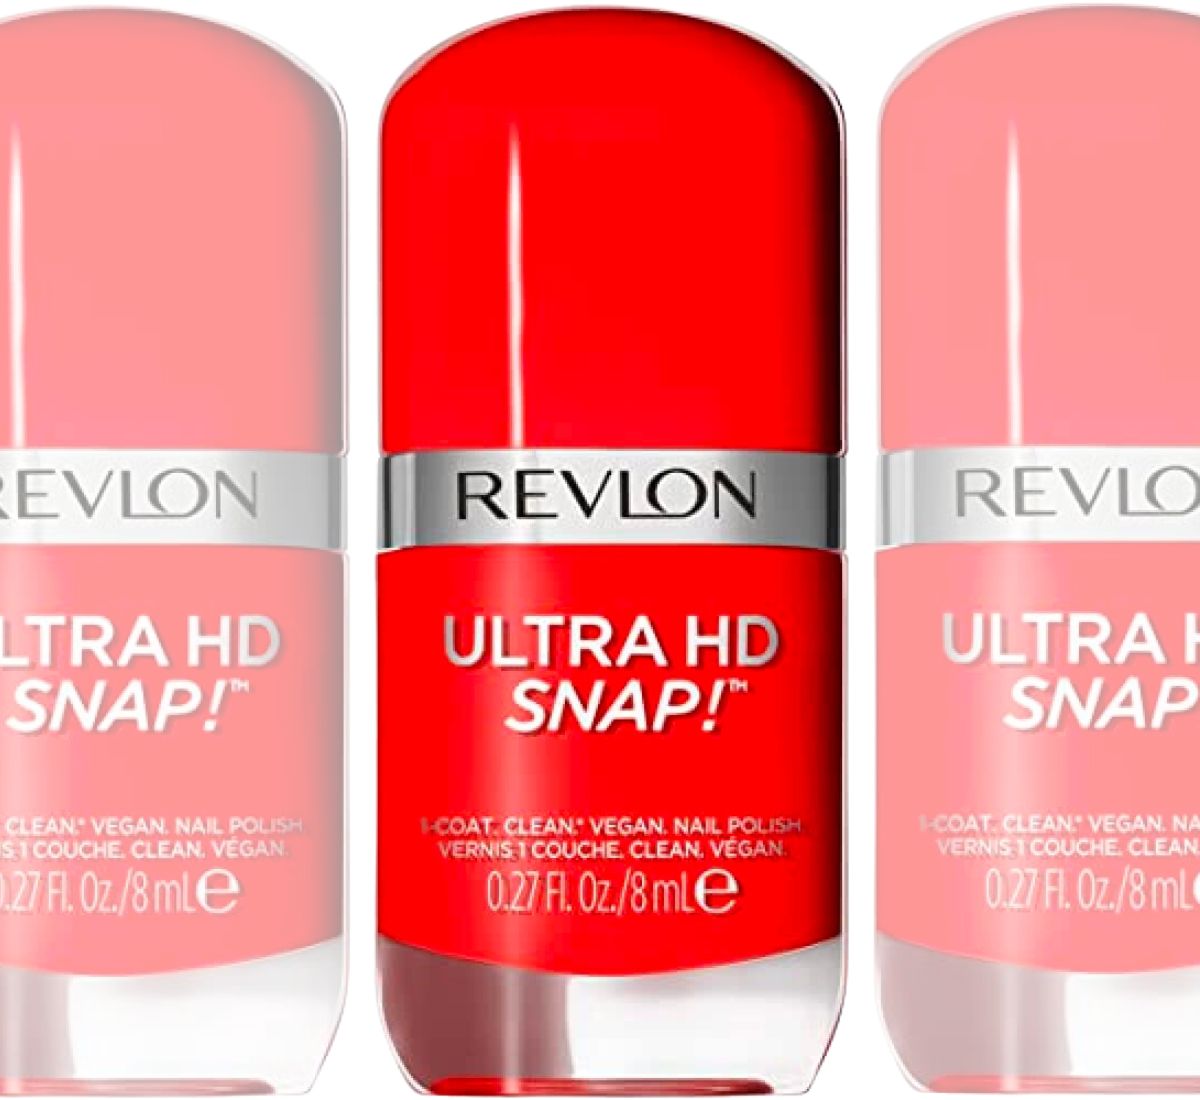 Revlon ultra snap hd shes on fire